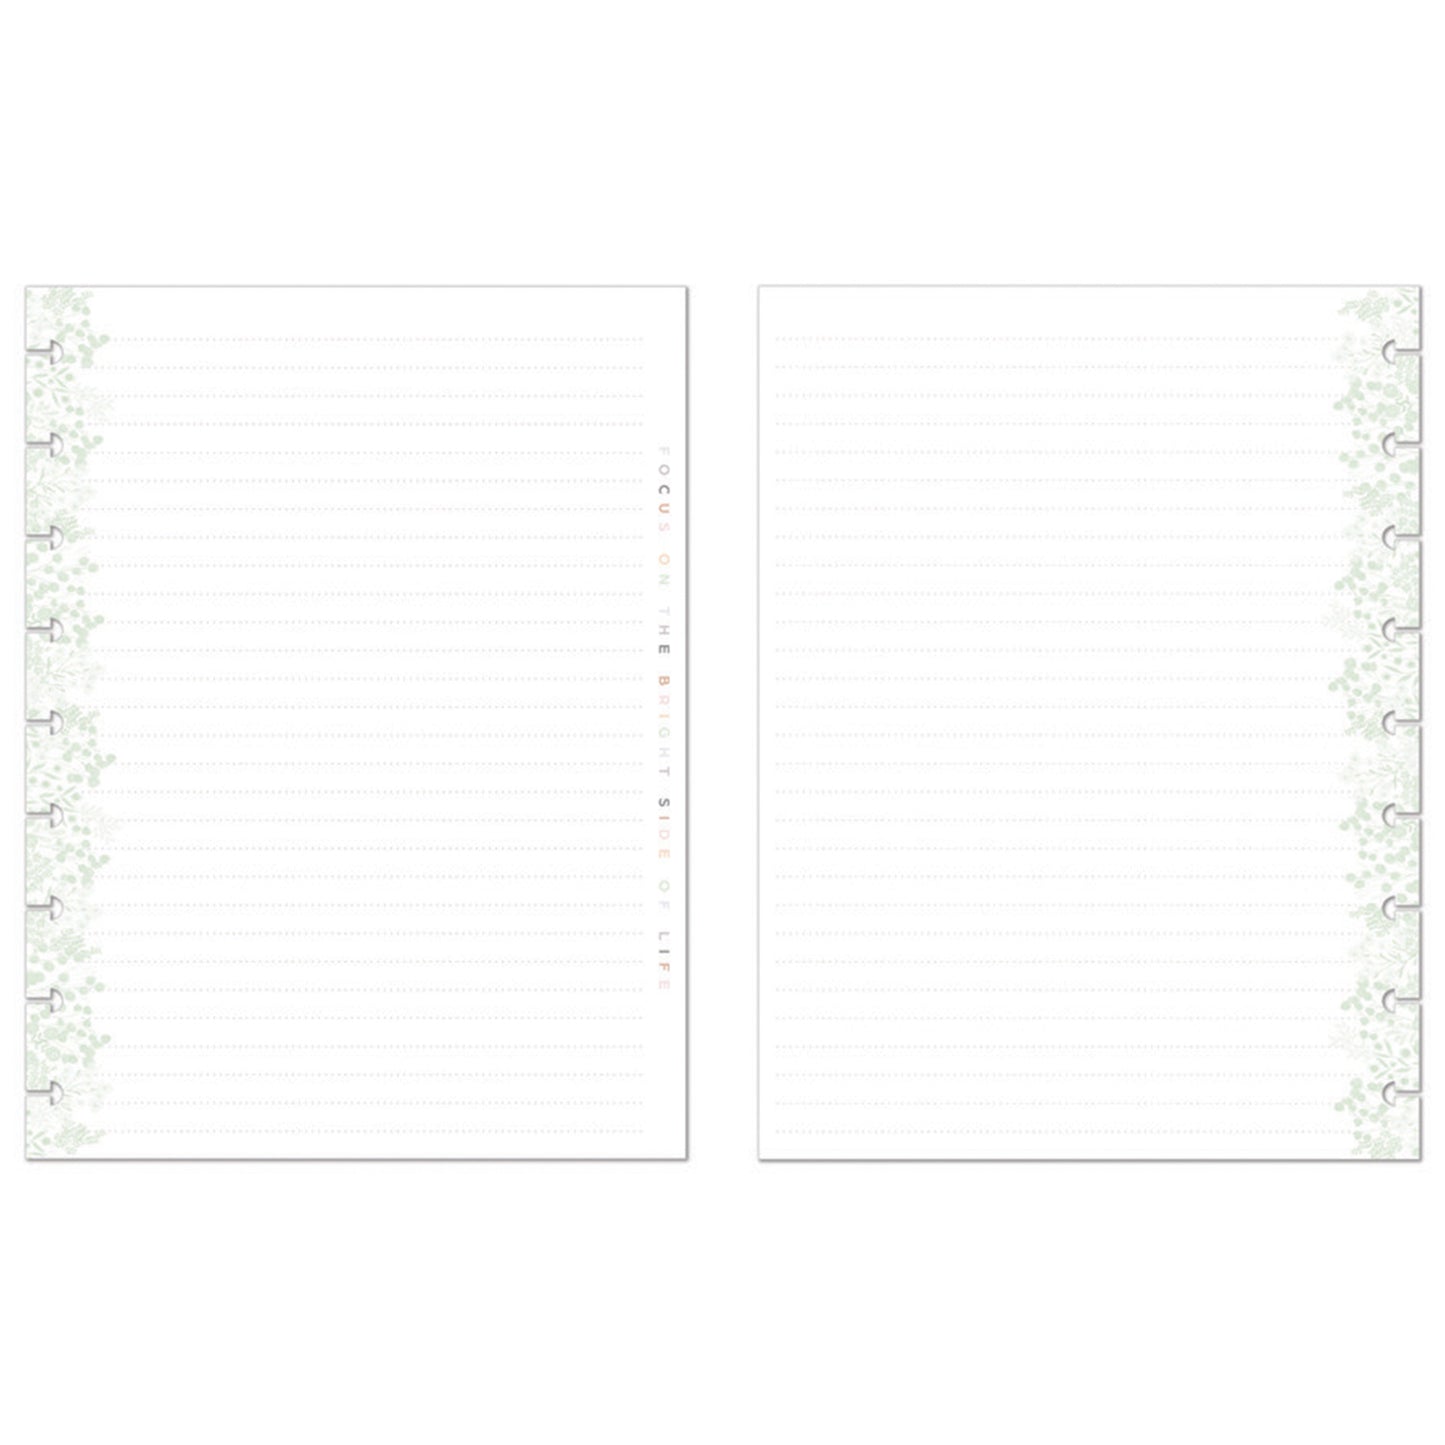 Happy Planner - Happy Notes Classic - Simple Springs